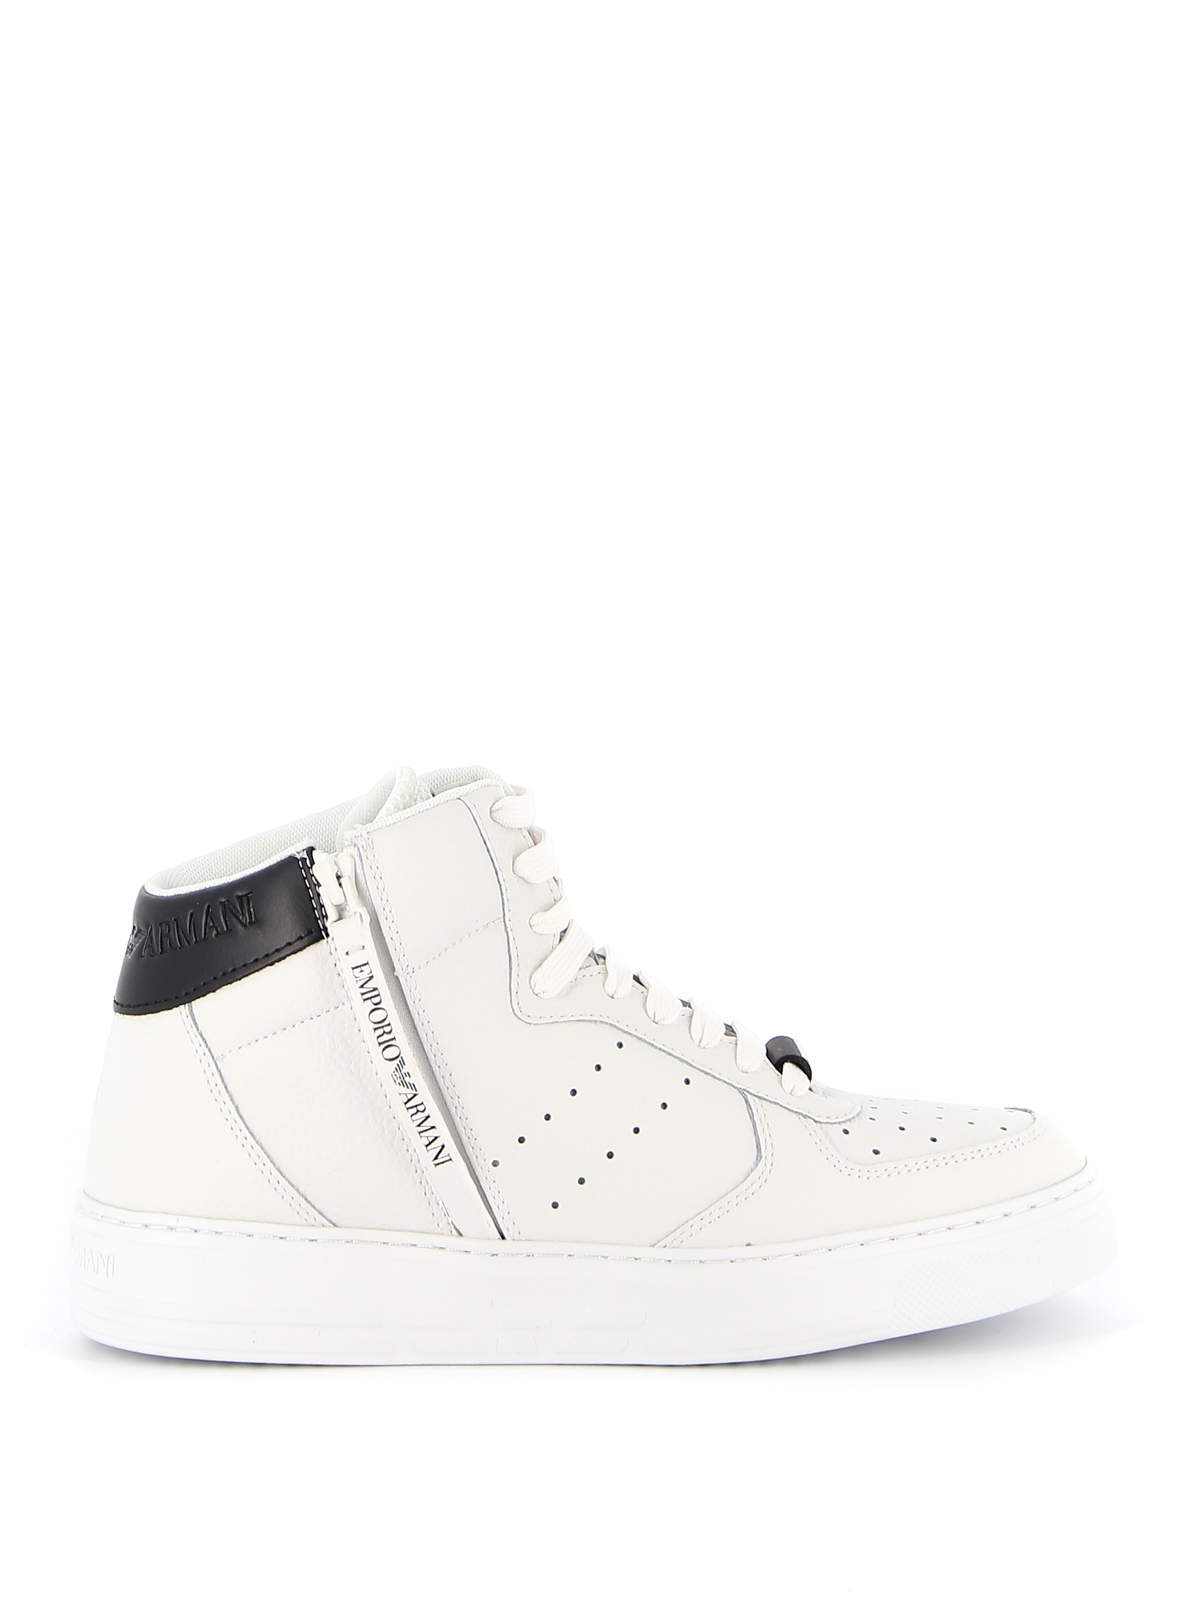 Trainers Emporio Armani - Perforated leather high top sneakers -  X4Z083XM226A791